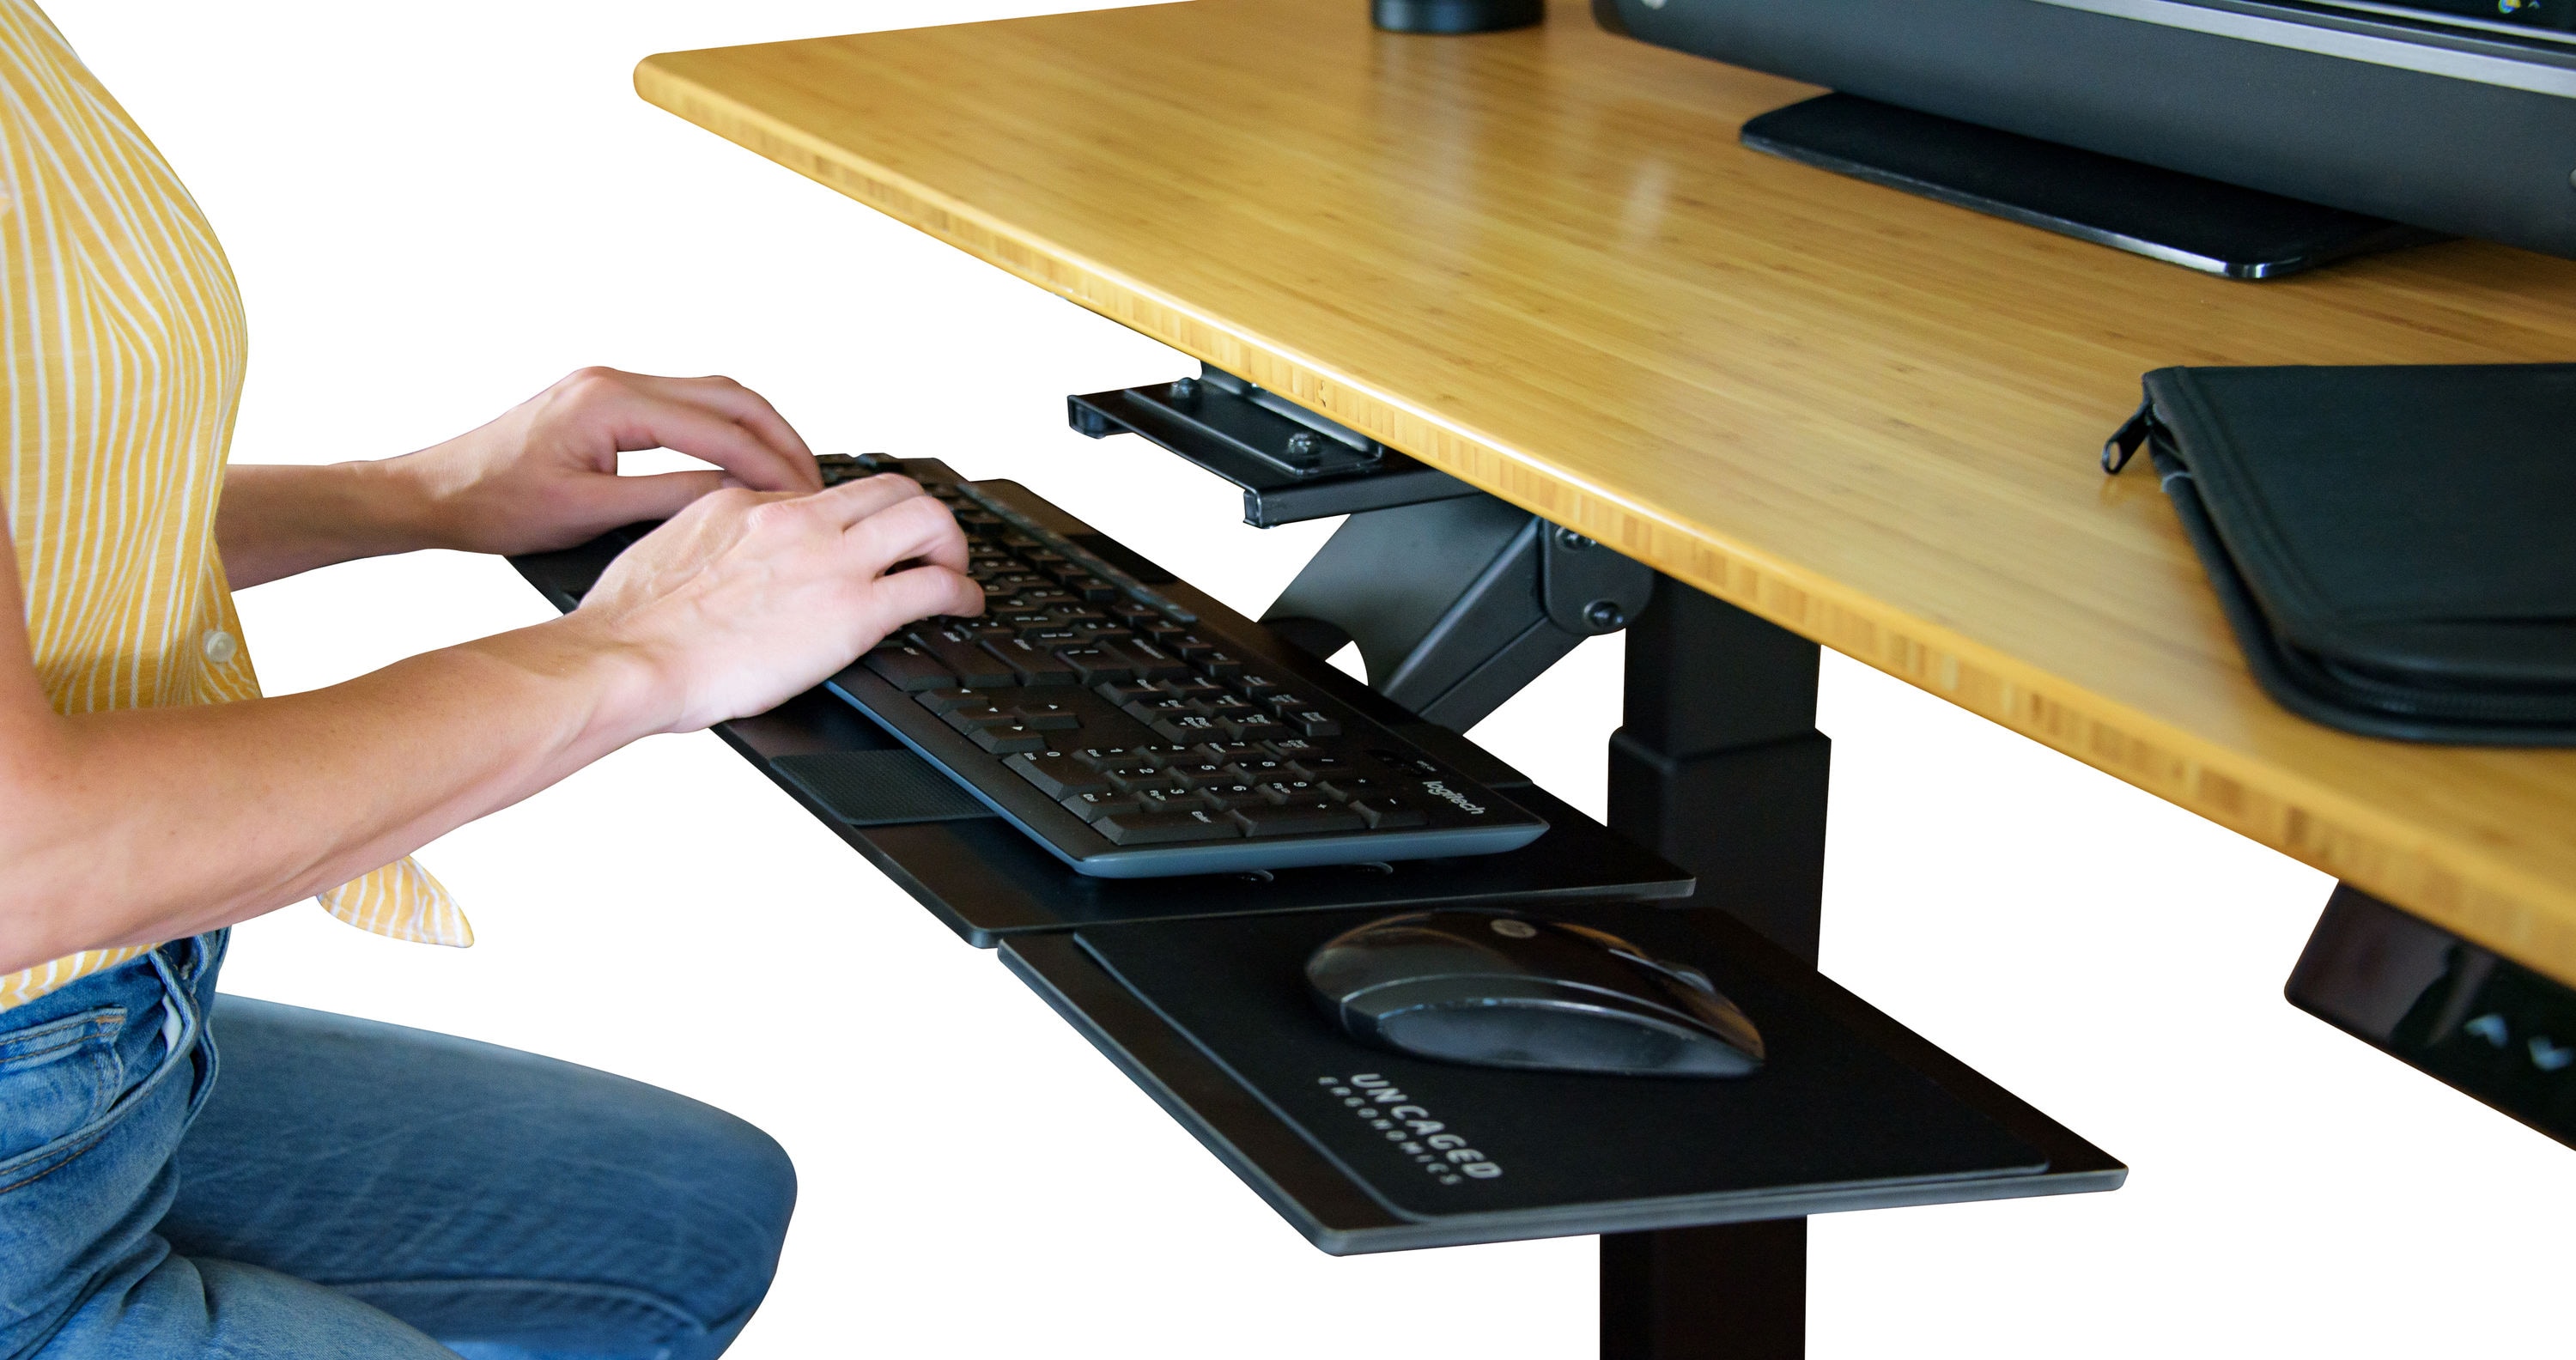 Uncaged Ergonomics Kt1 Ergonomic Keyboard Tray in the Office Accessories  department at